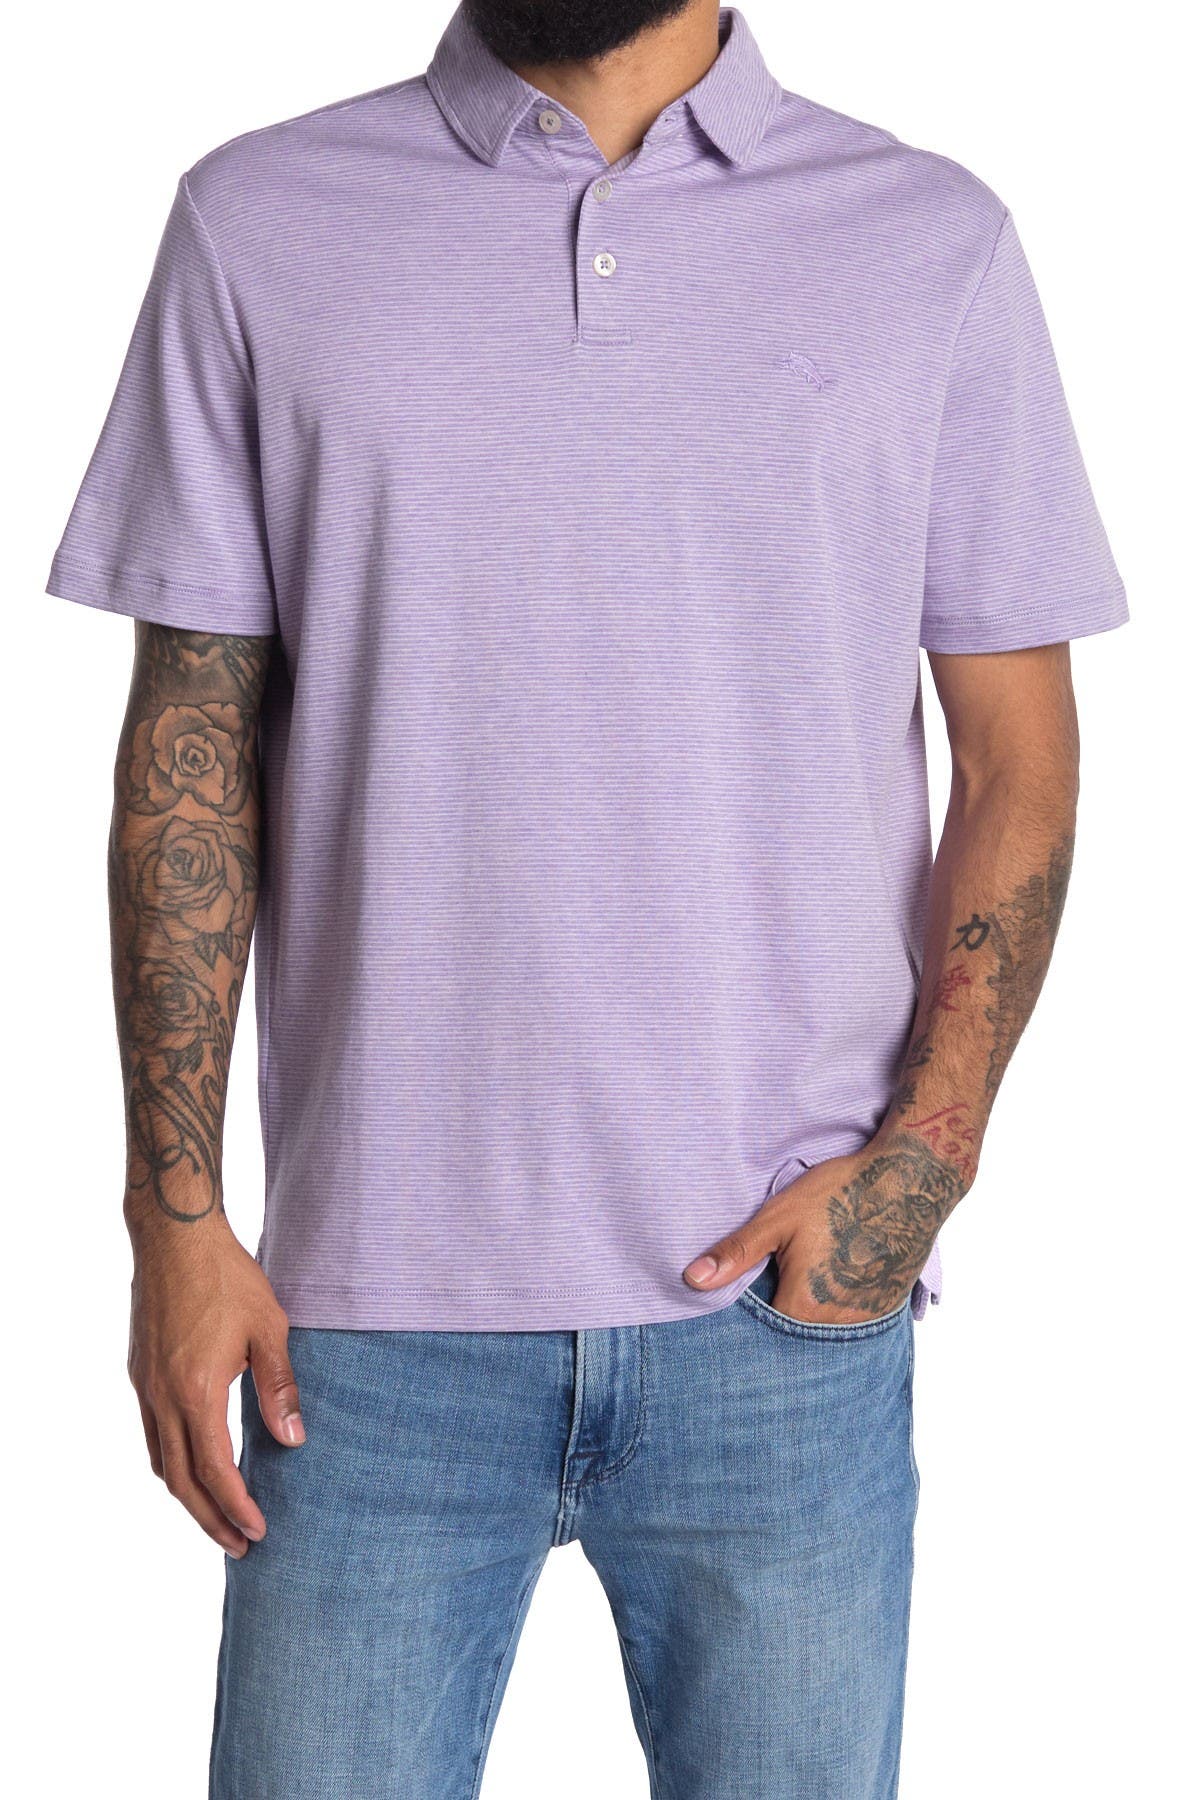 Tommy Bahama Pacific Shore Polo Shirt In Violet Tulip Heather